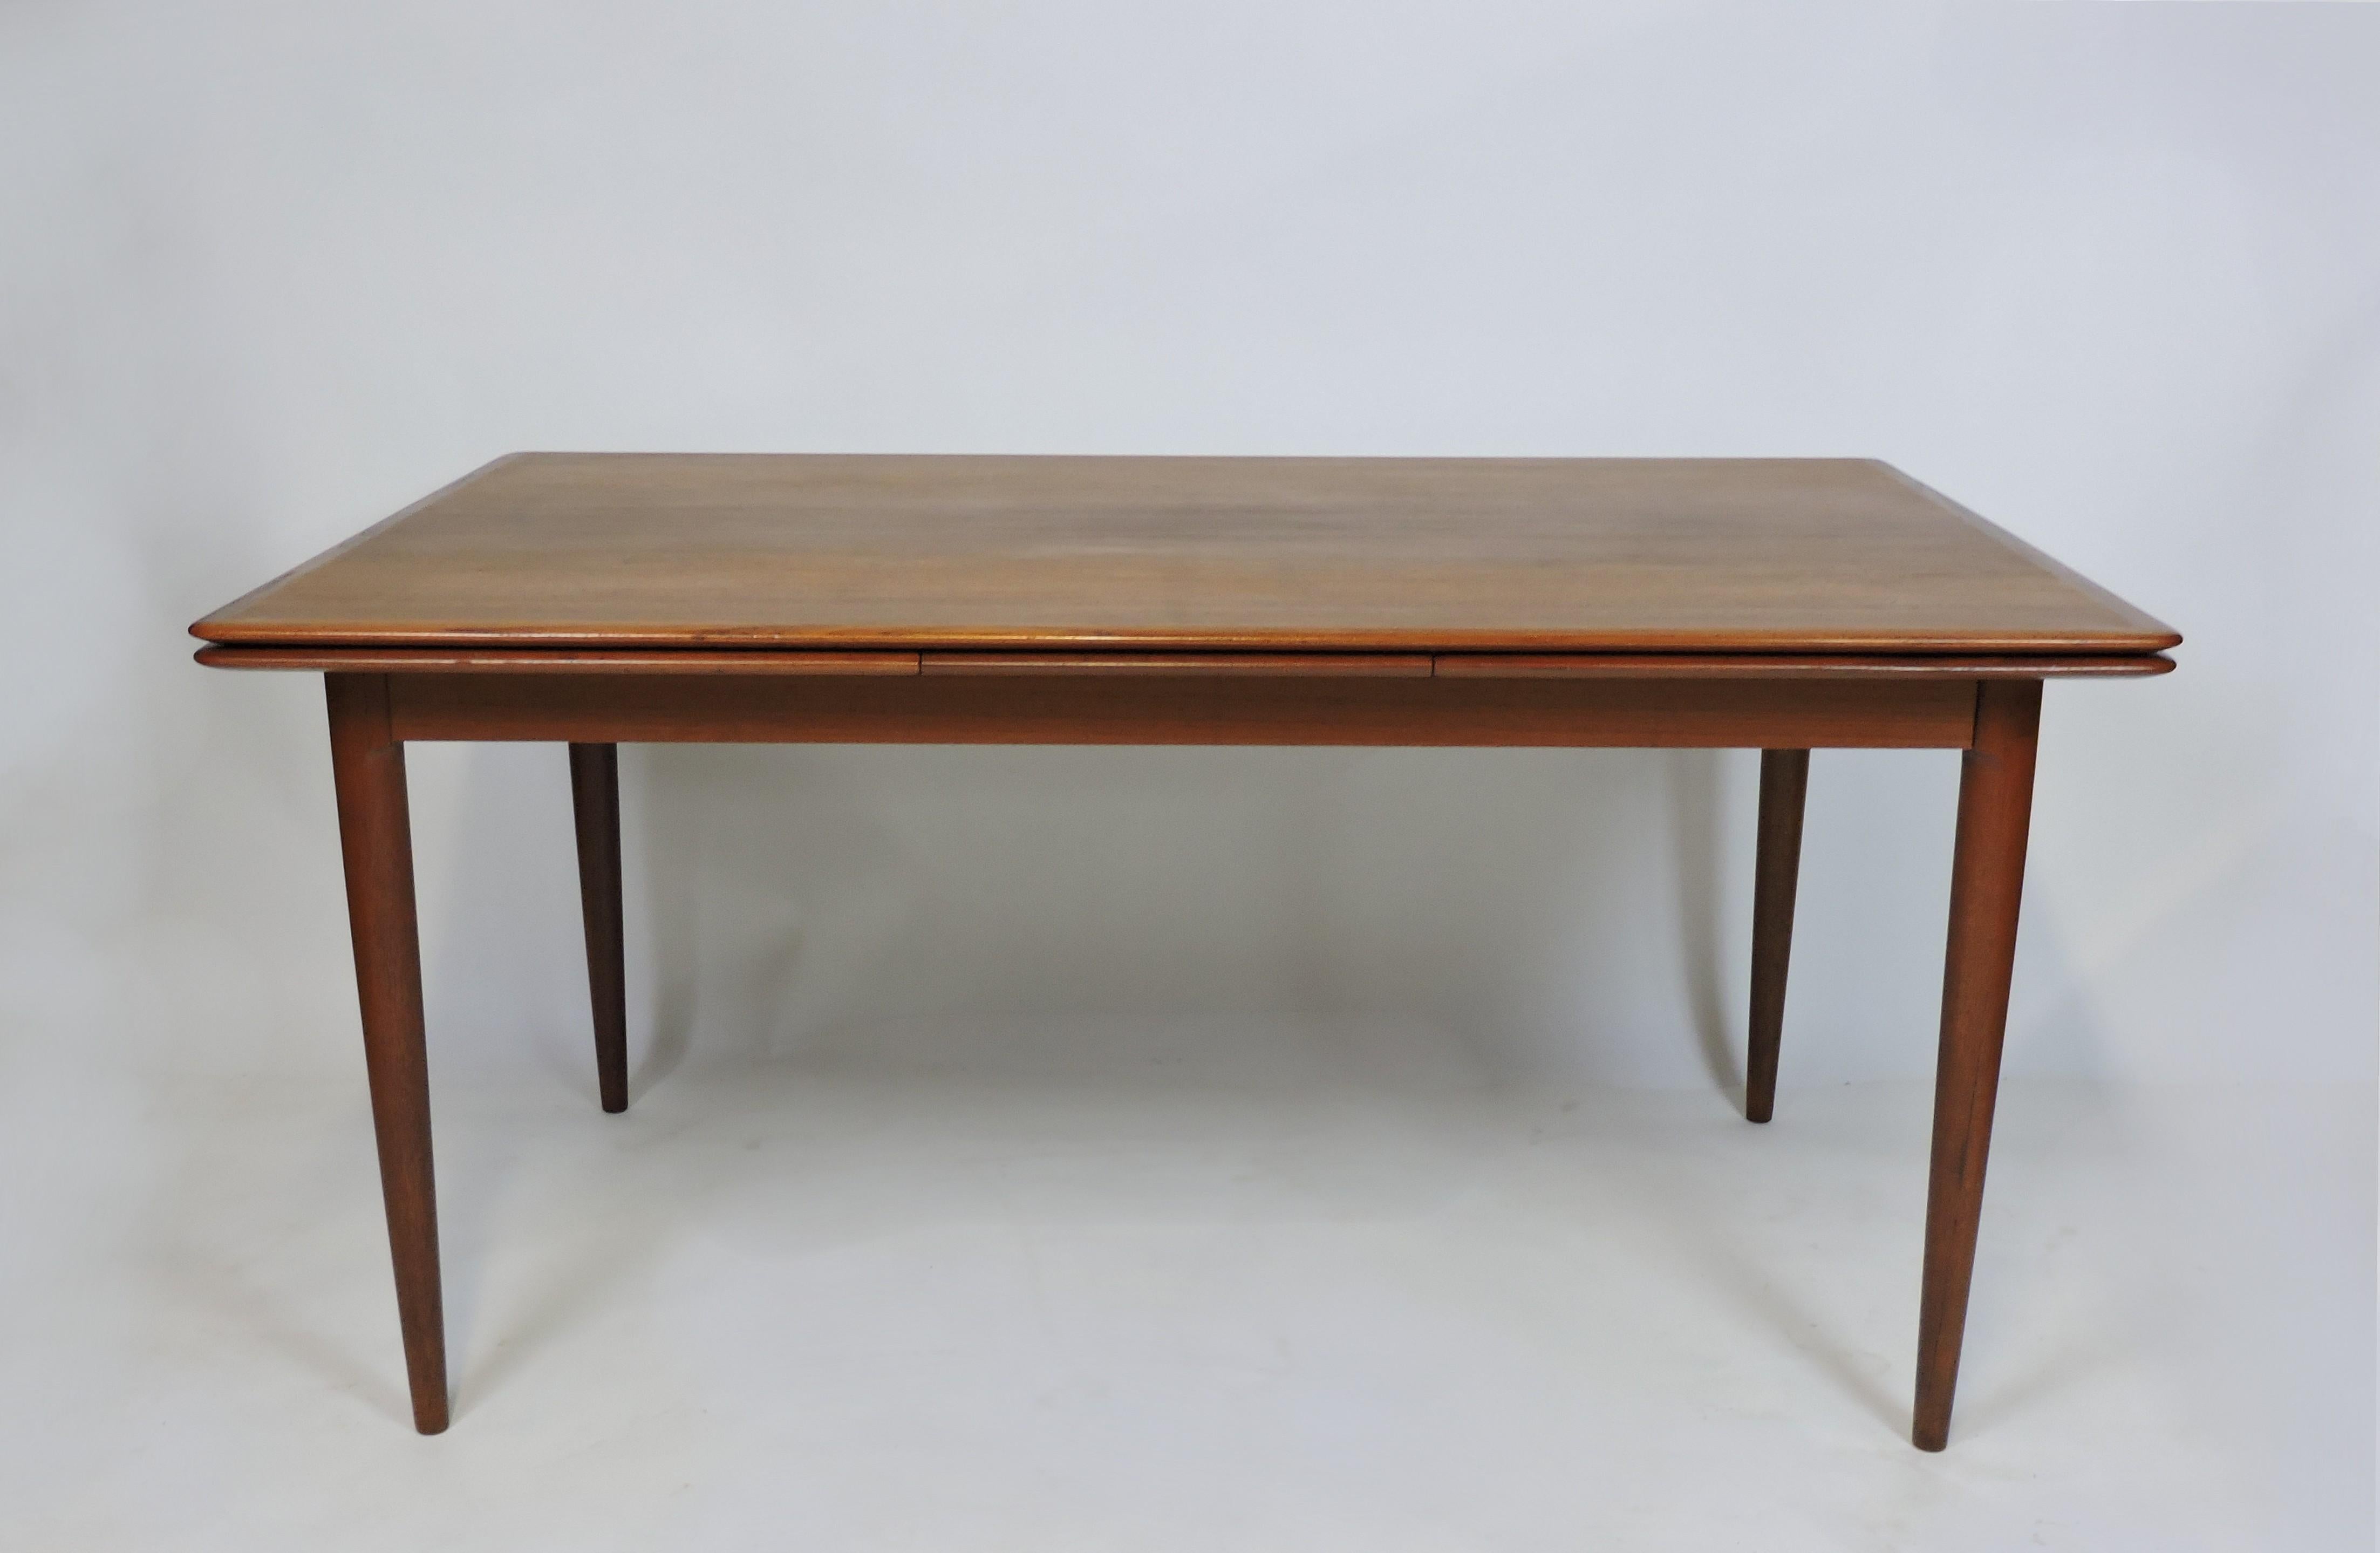 Beautiful and large teak dining table manufactured by Skovmand & Andersen in Denmark and imported to the US by Moreddi. This table has an elegant design with graceful solid teak tapered legs and two self-storing leaves that slide out to extend the